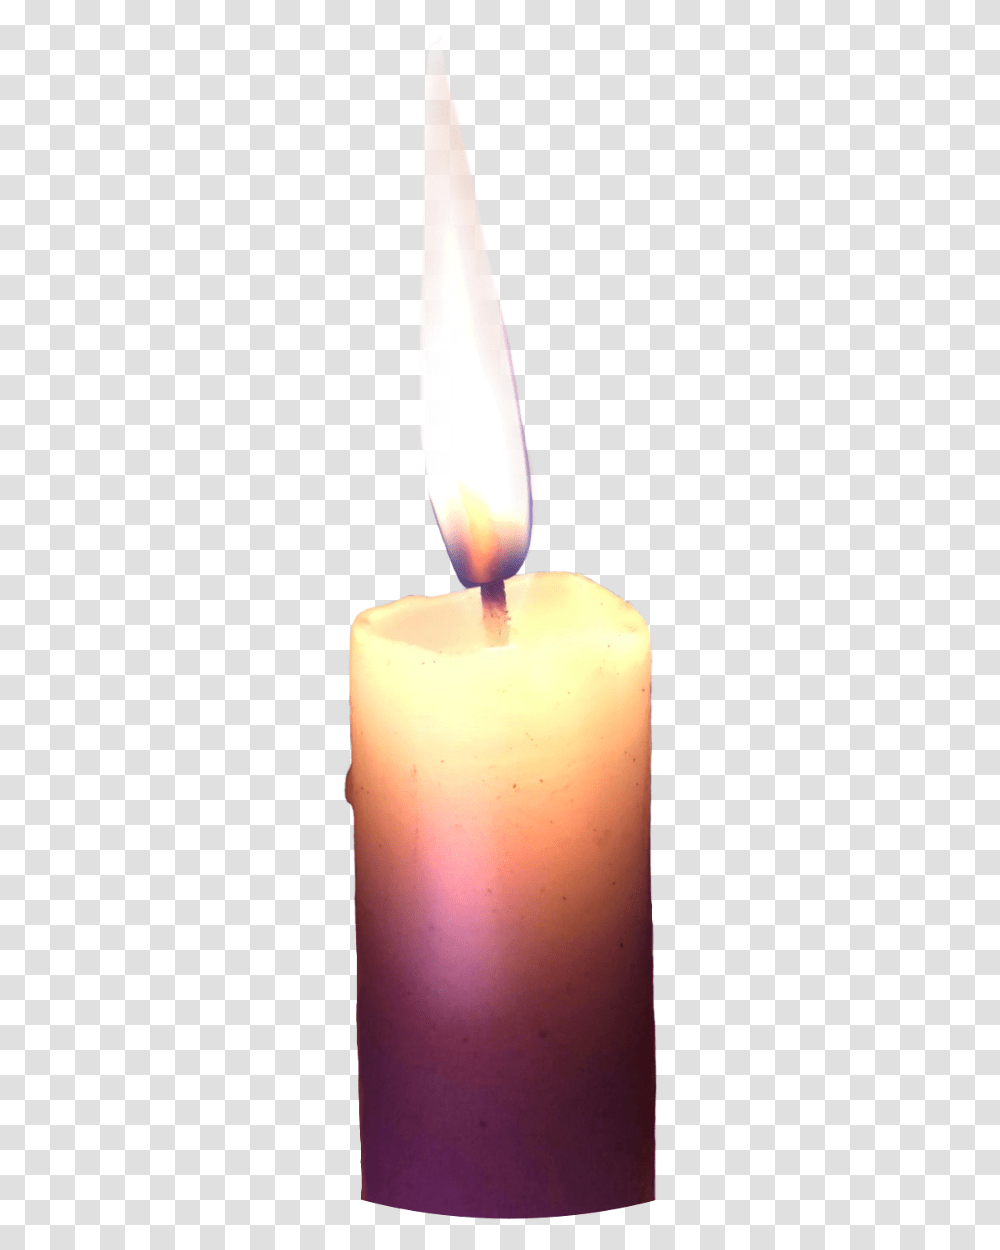 Candle Flame Light Night Real Original Photograph Advent Candle Transparent Png